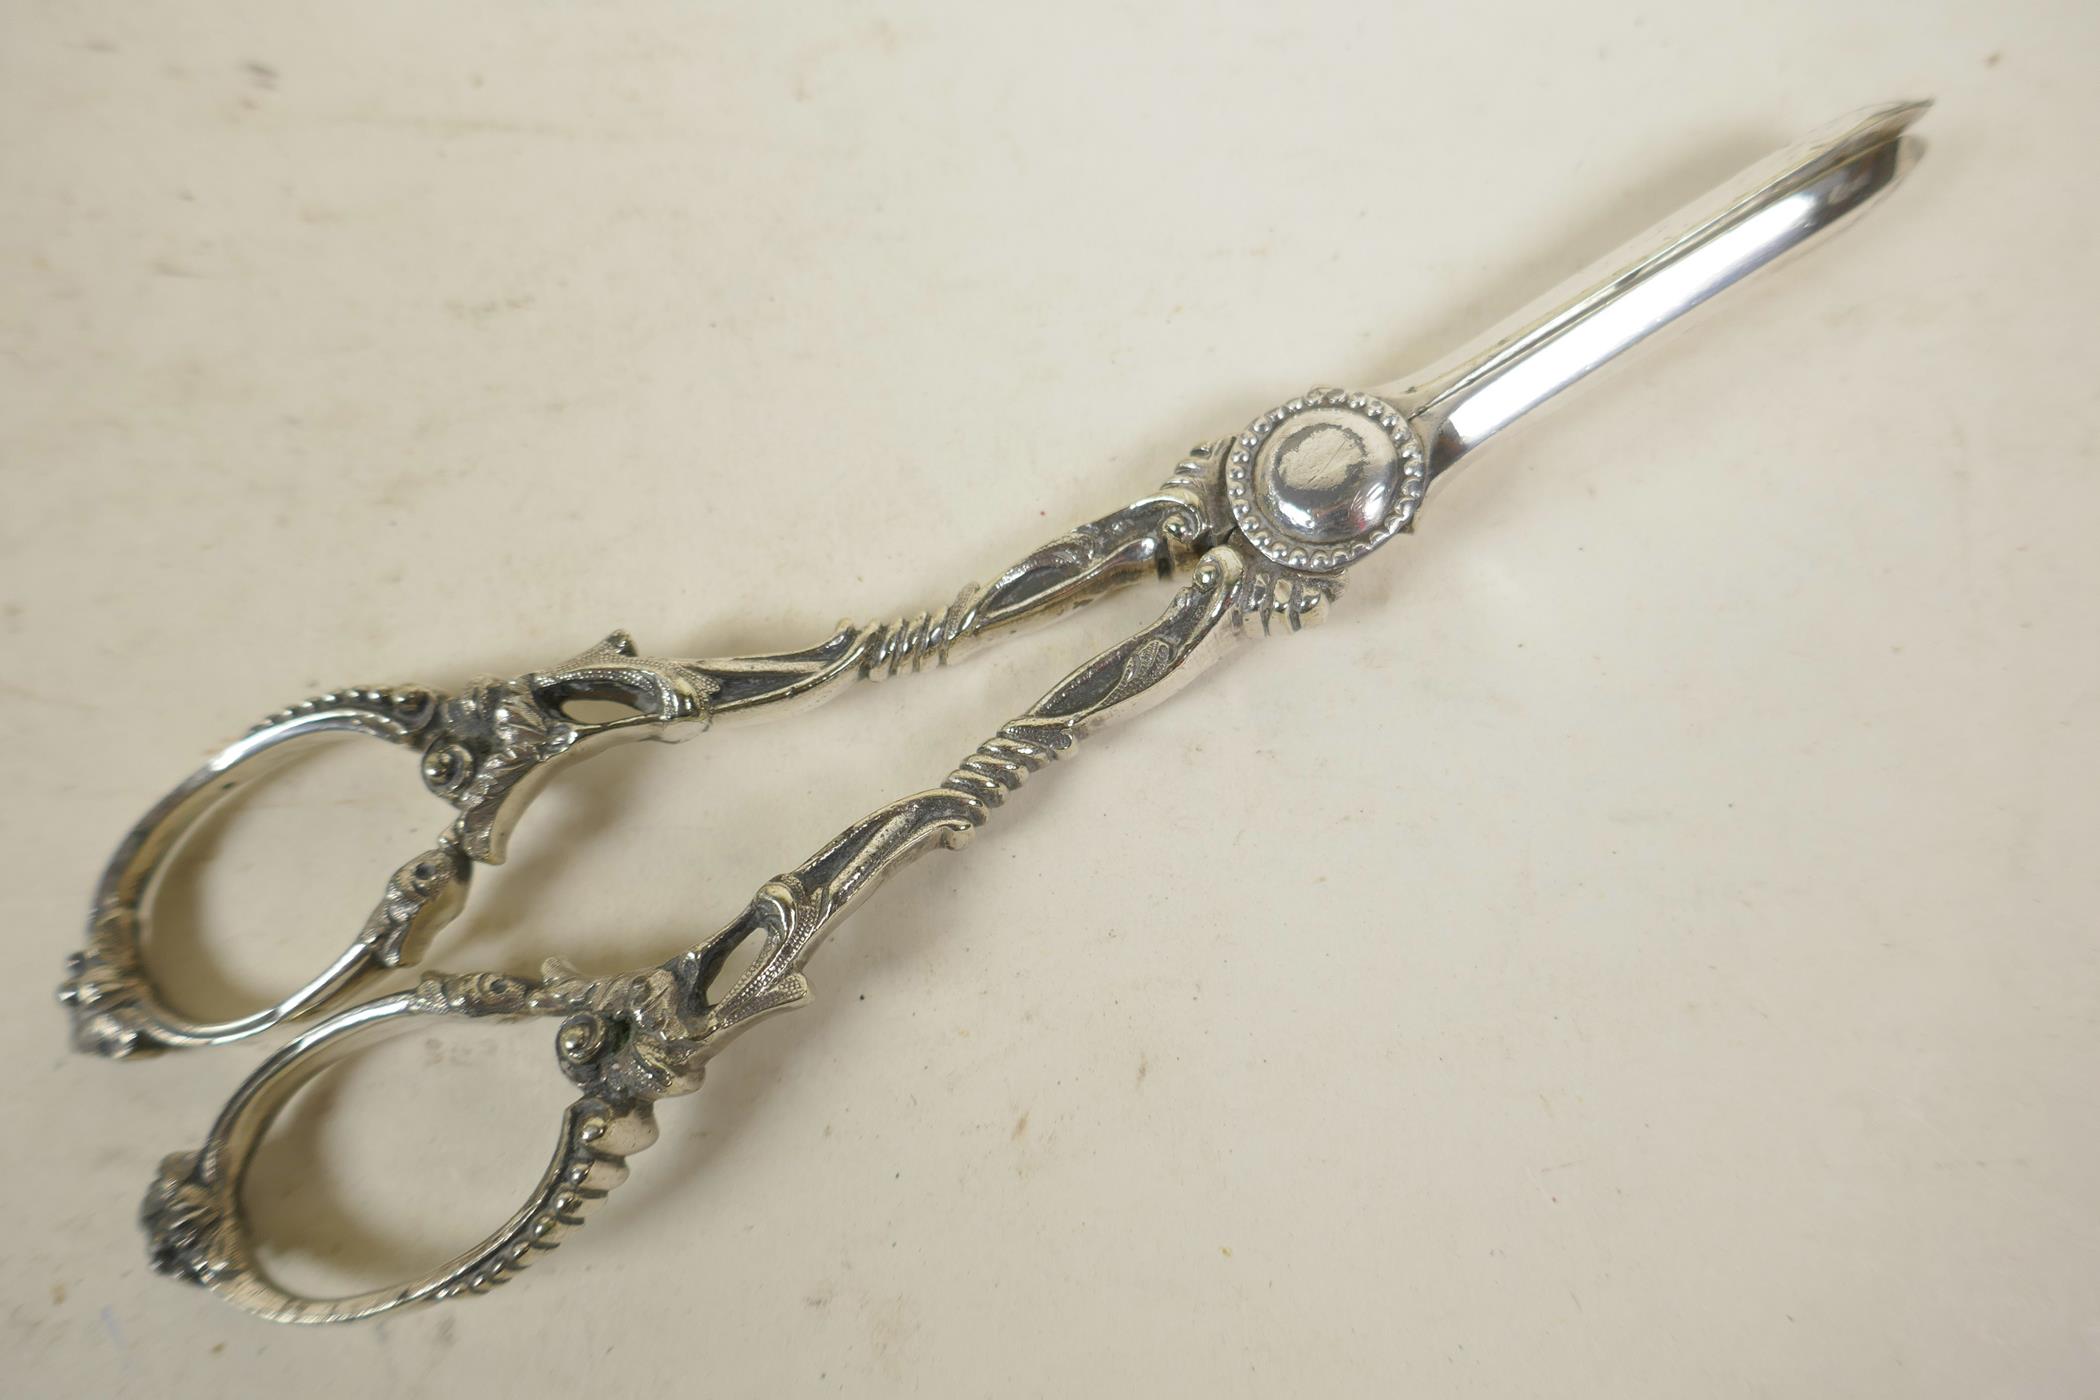 A pair of ornate silver plated grape scissors, 7" long